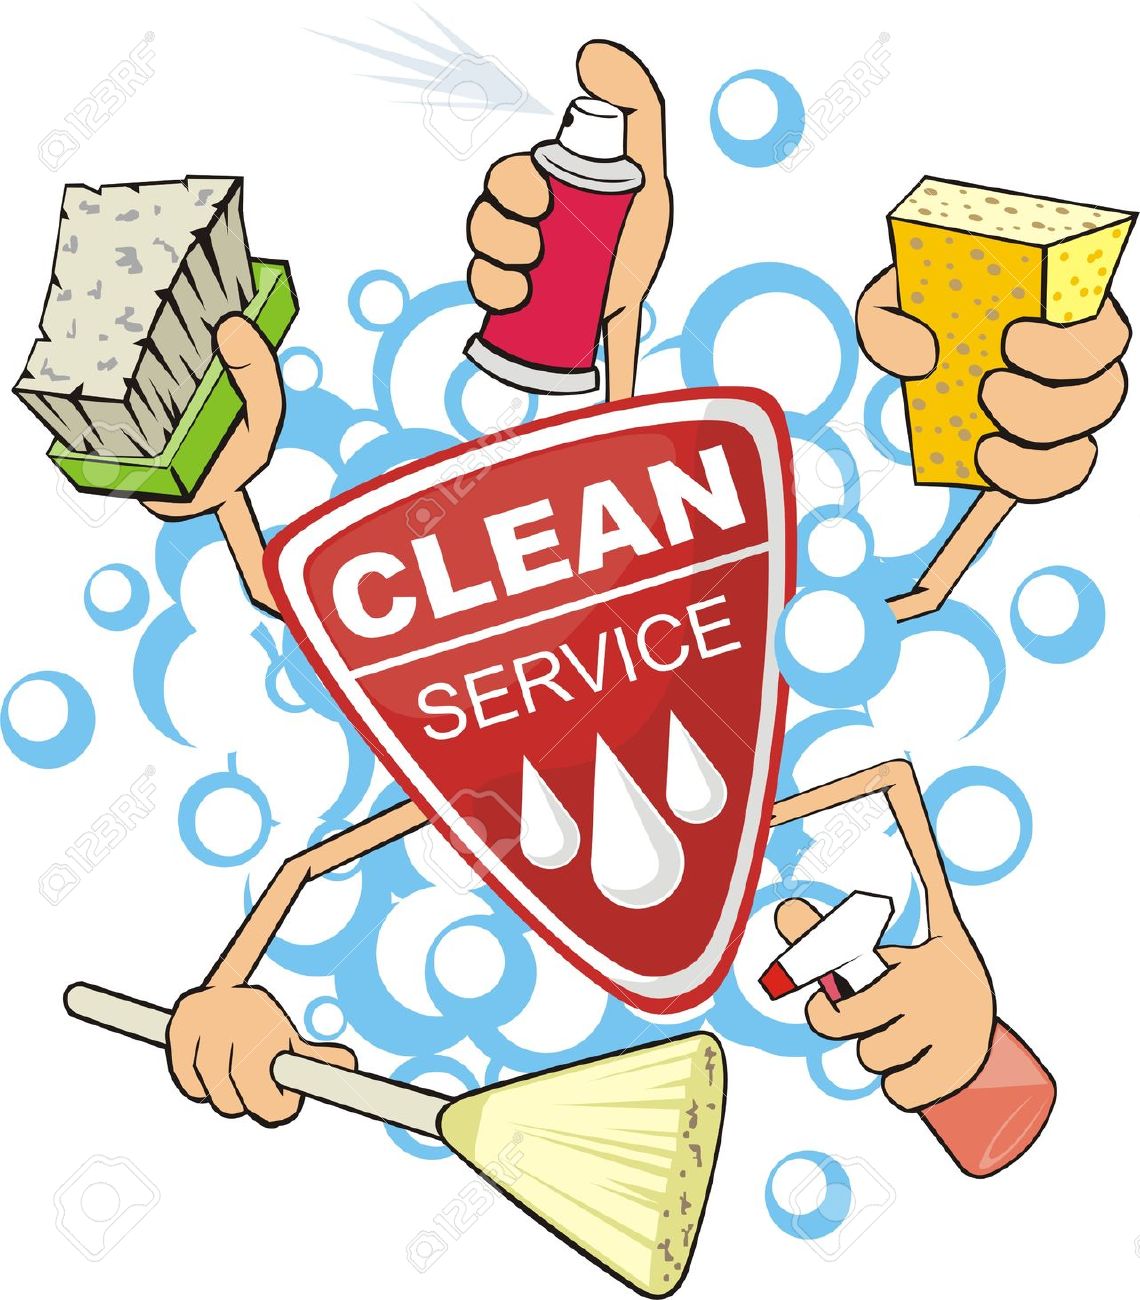 Cleaning clip art vector.